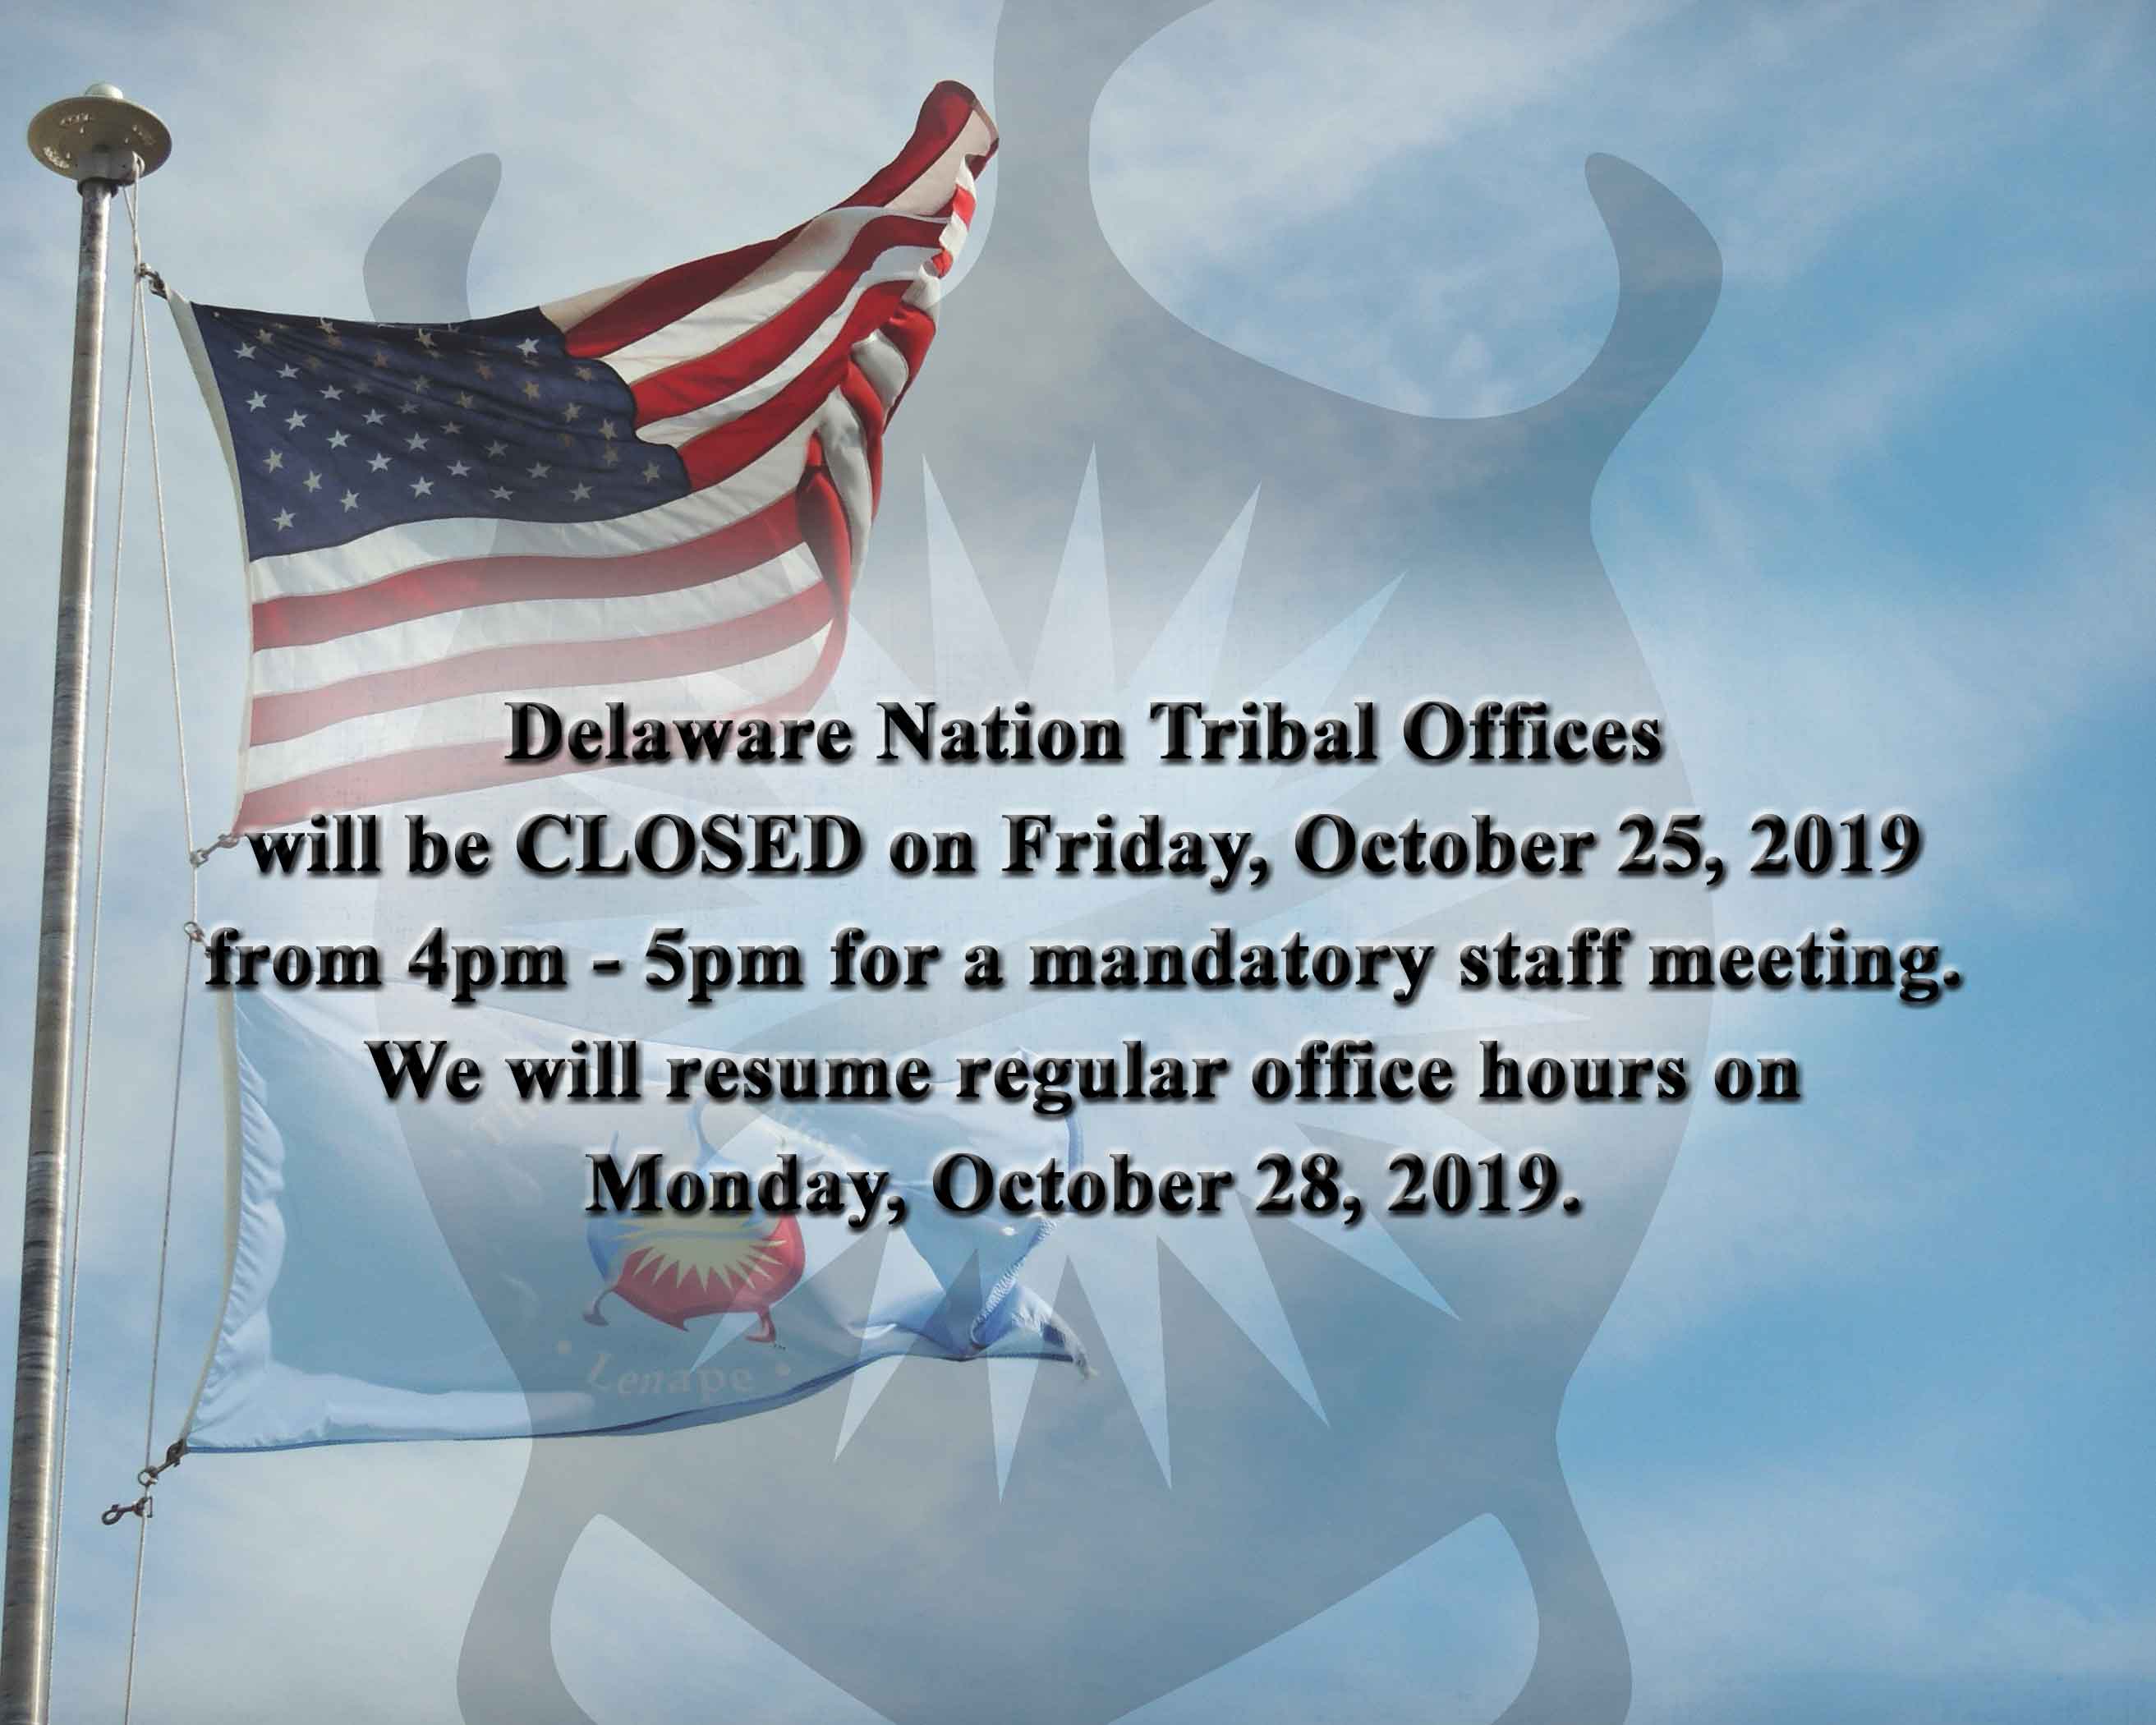 Offices CLOSING at 3:00 PM (CST)